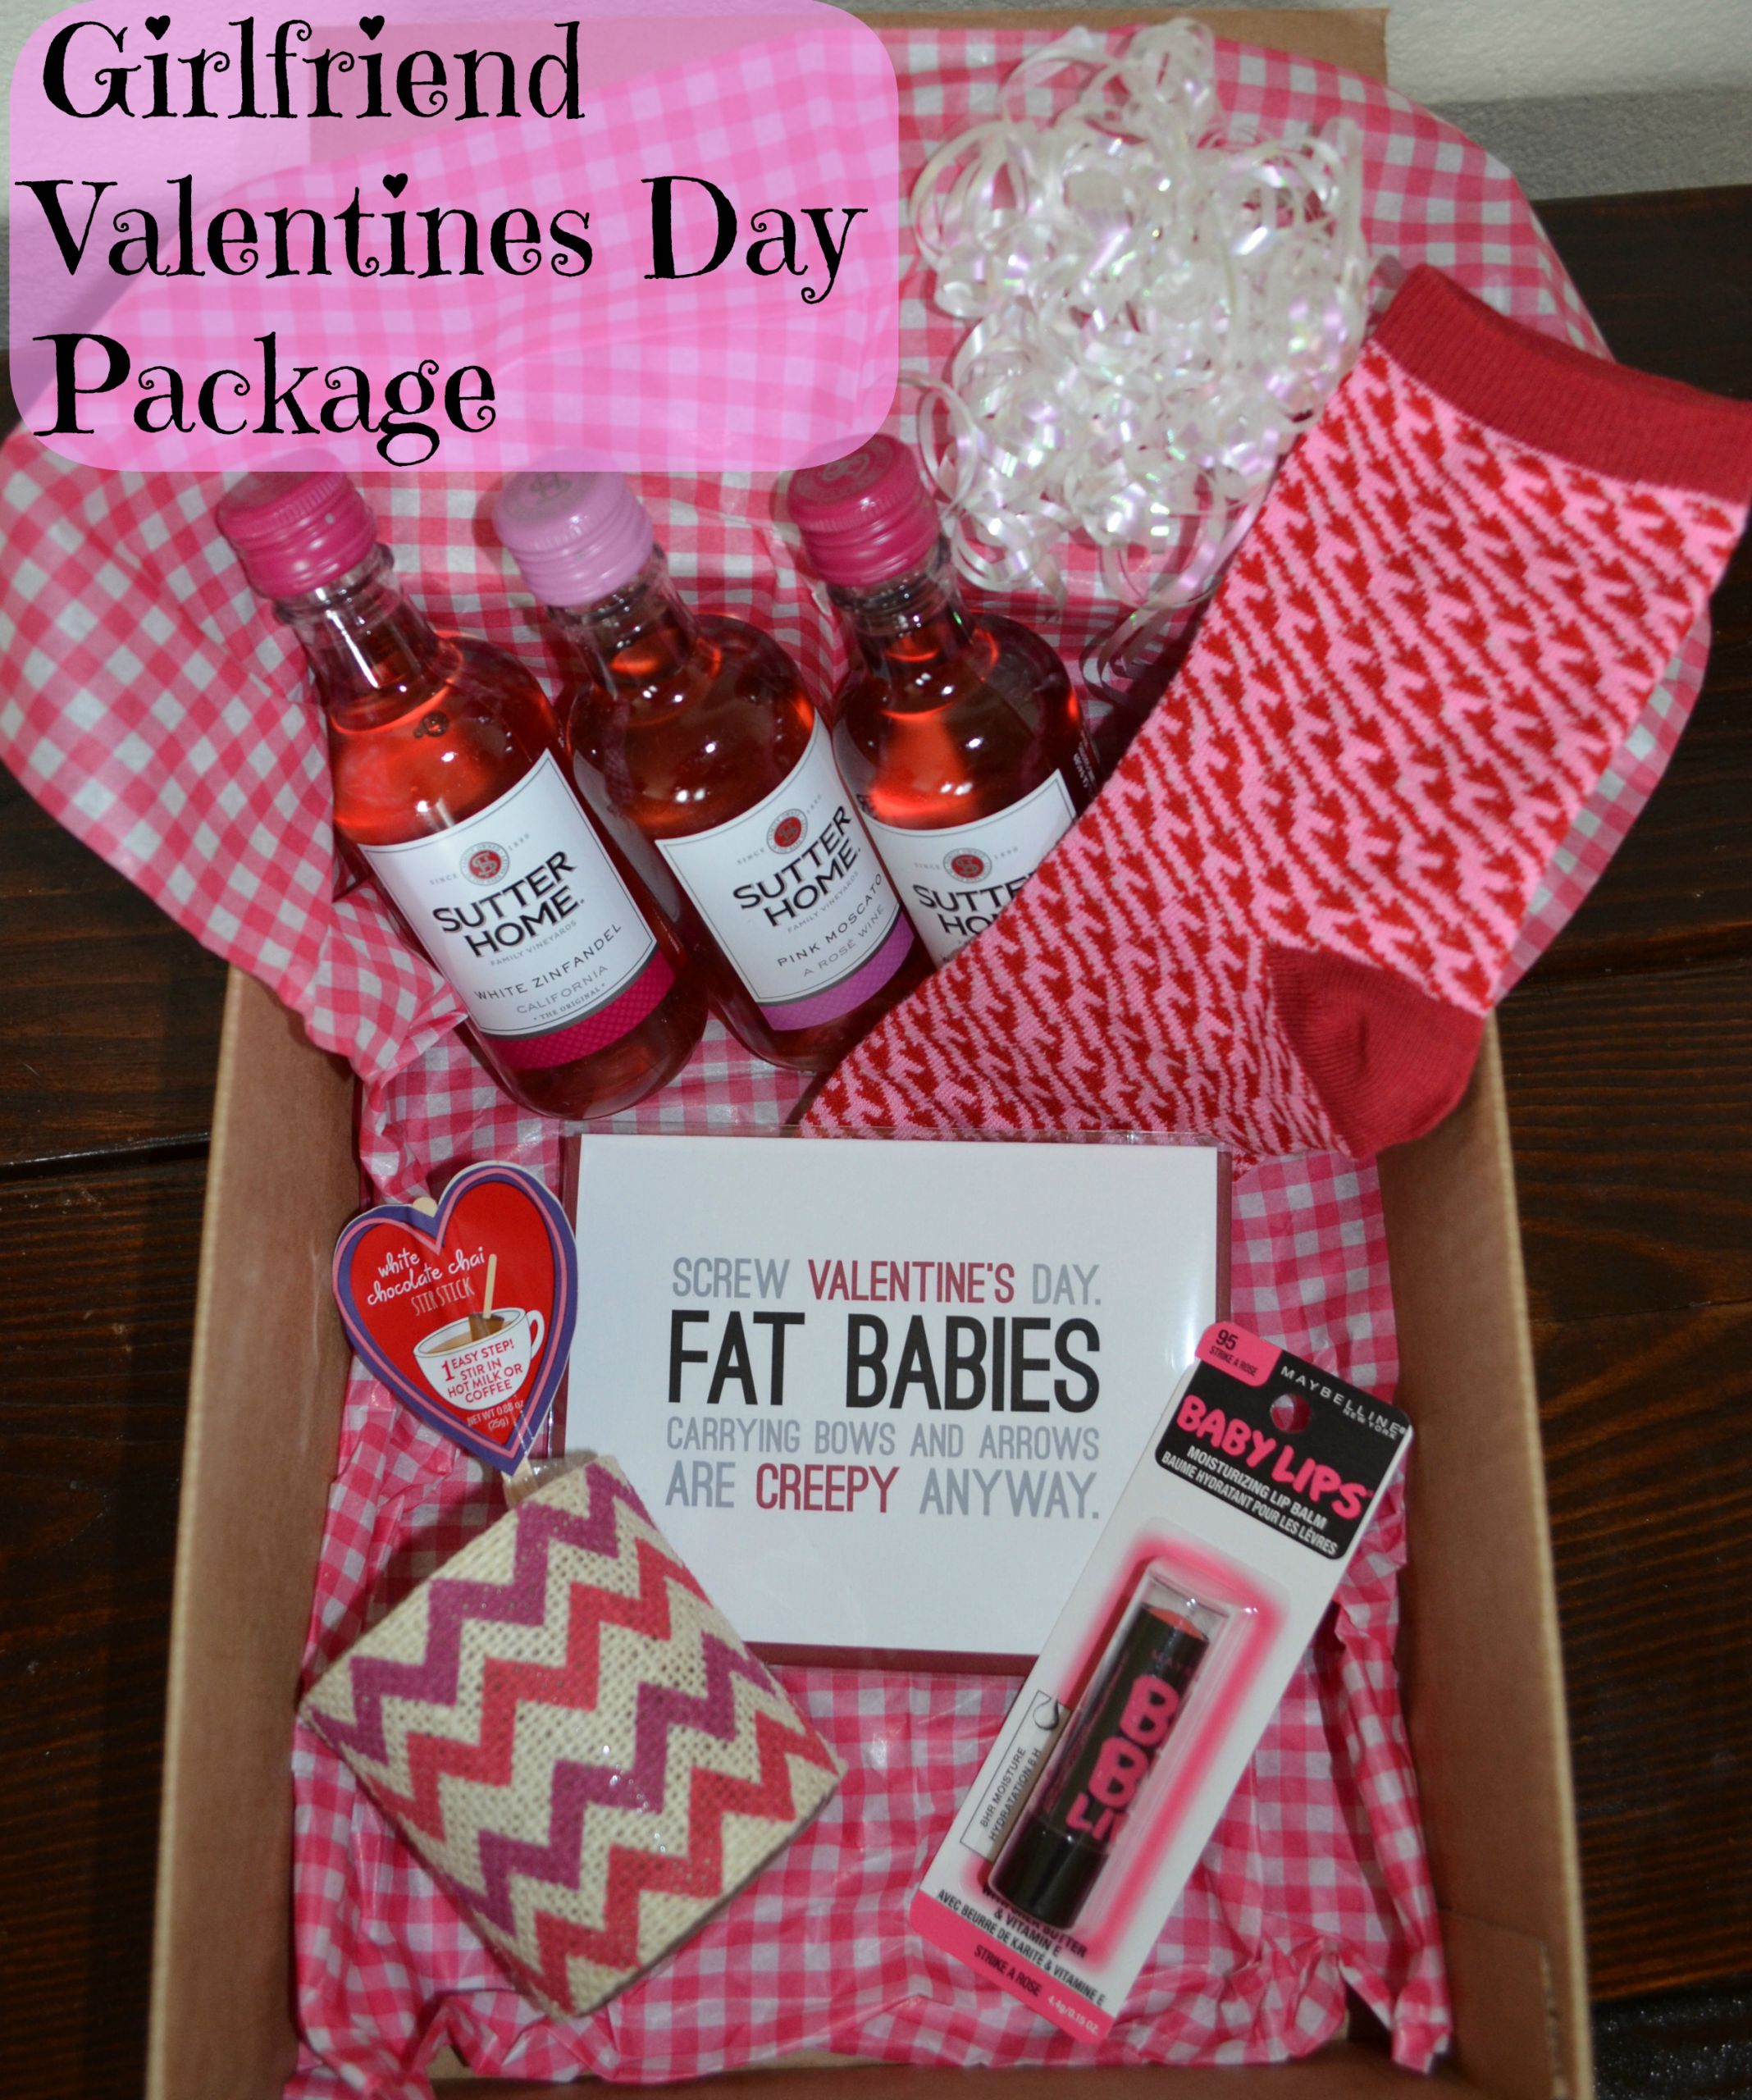 Valentines Day Ideas For Your Boyfriend
 24 LOVELY VALENTINE S DAY GIFTS FOR YOUR BOYFRIEND